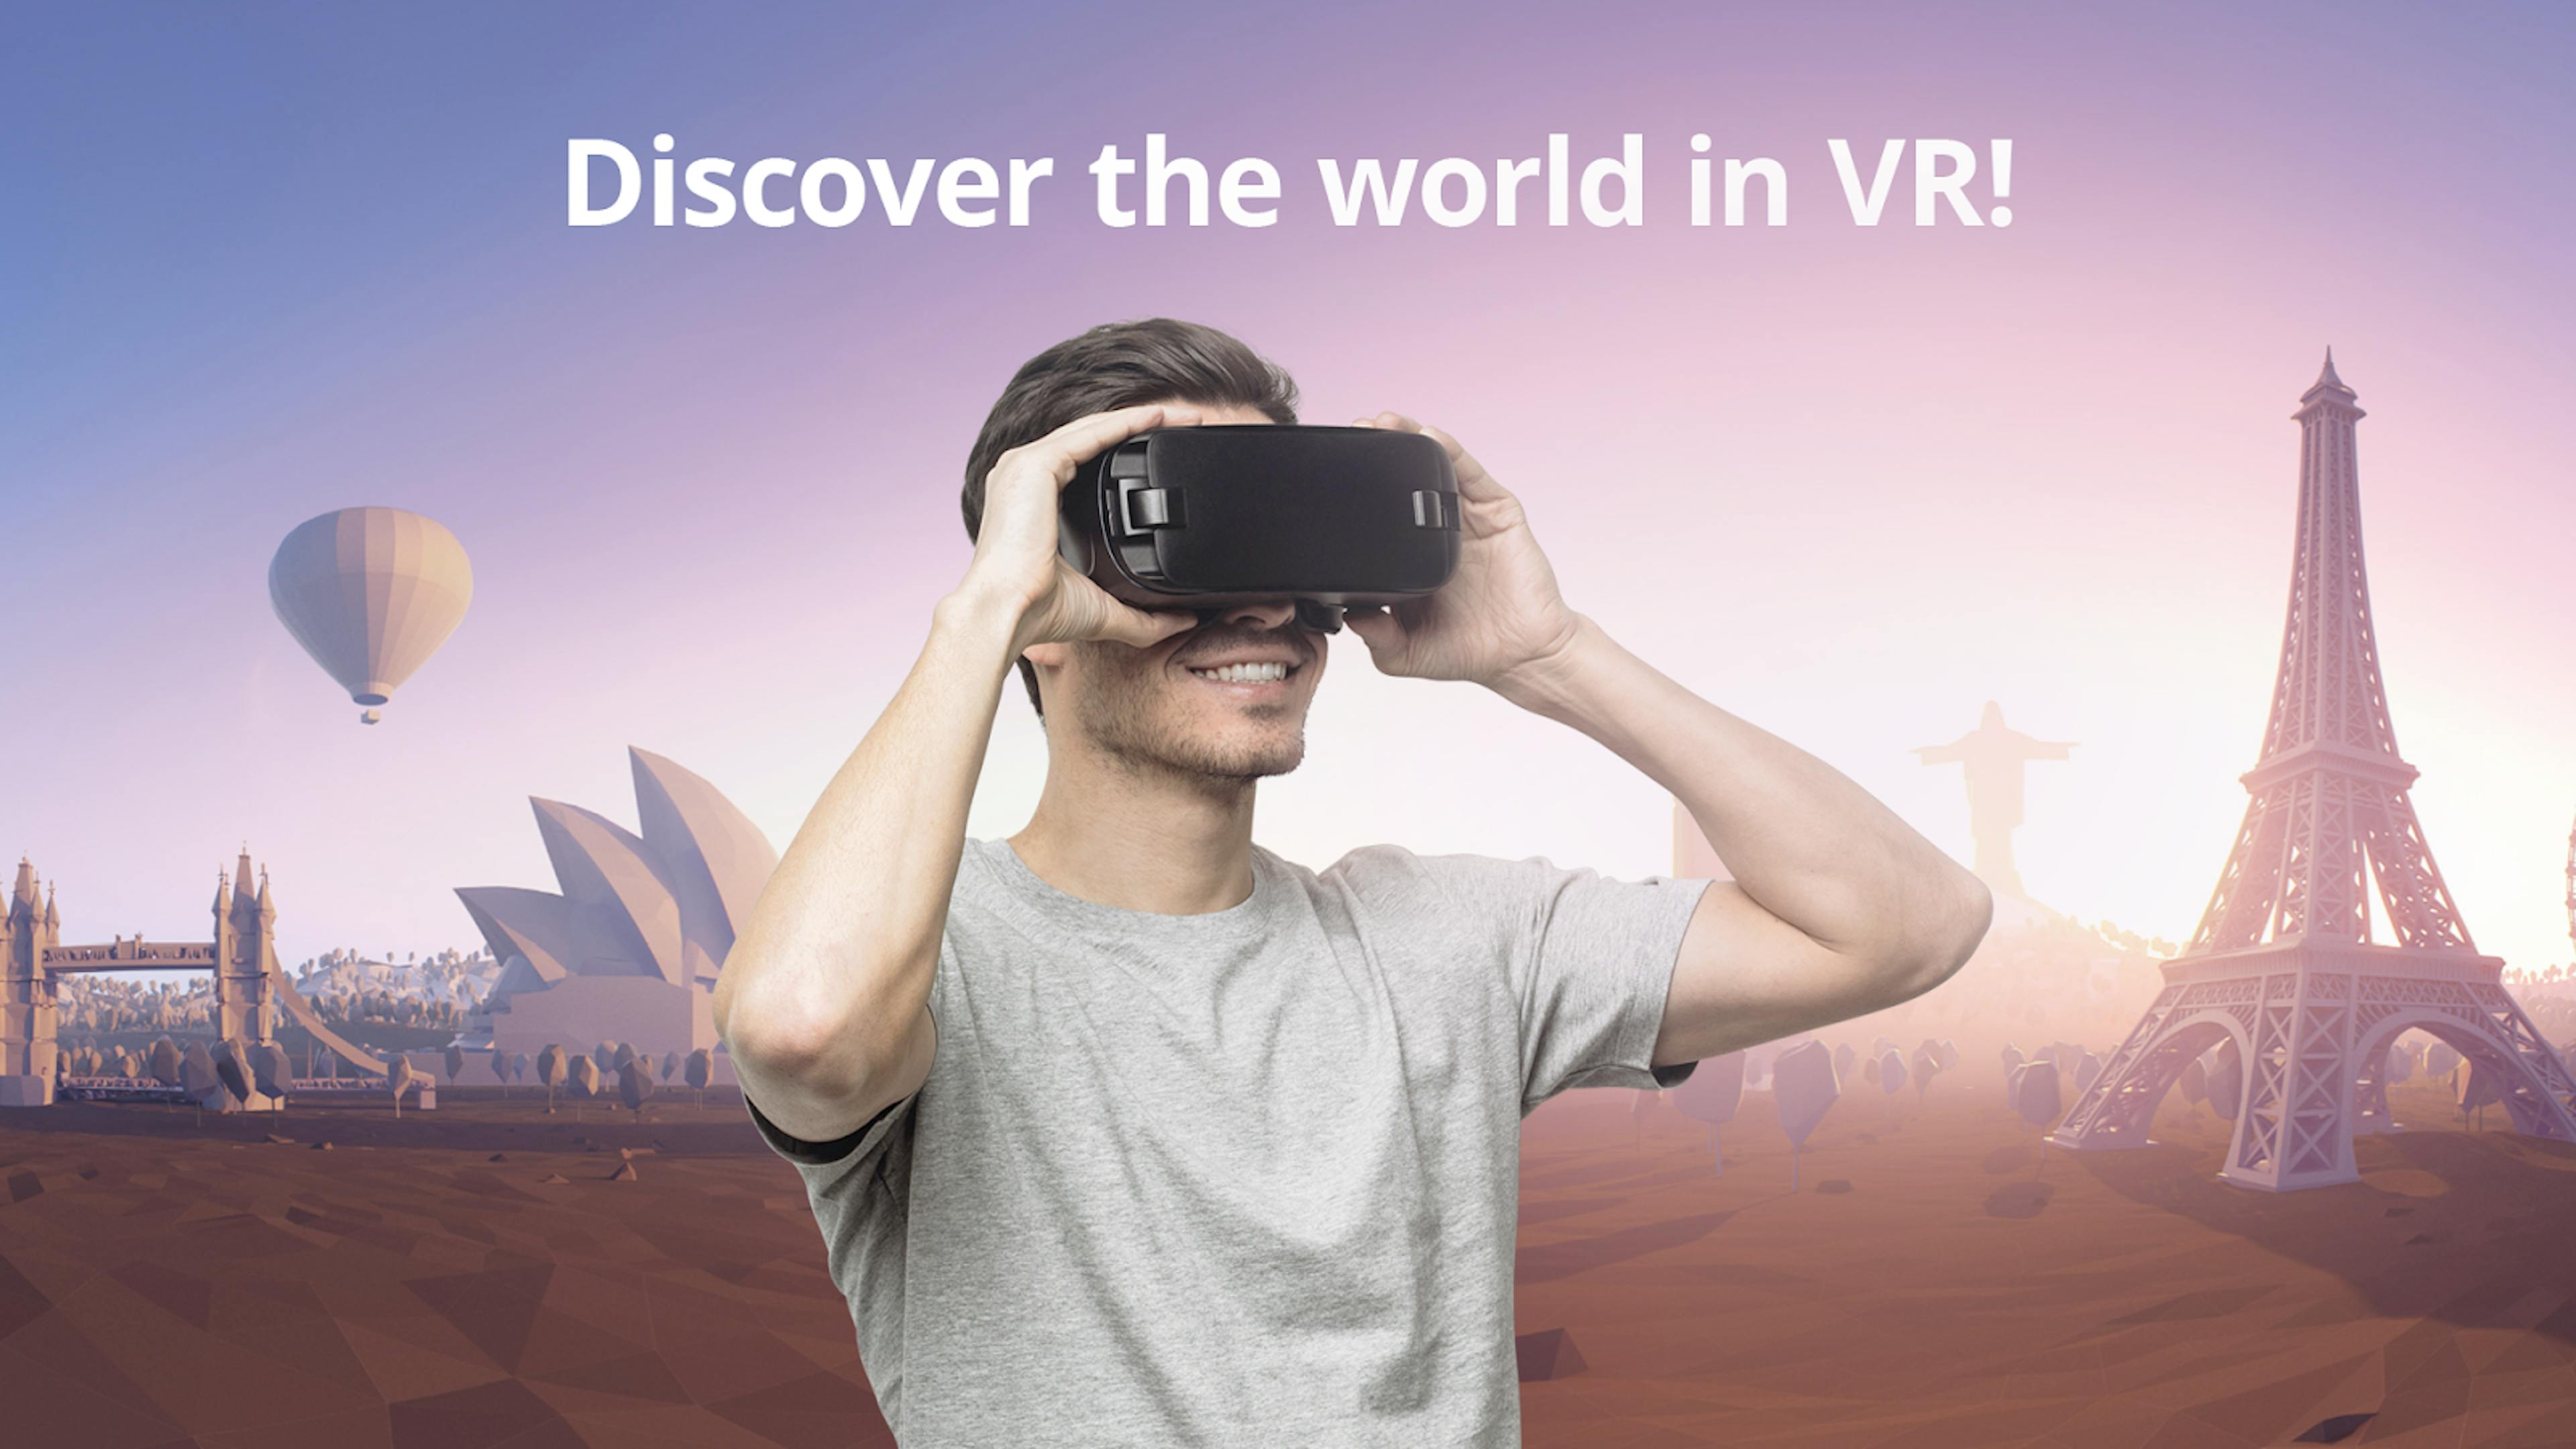 VR technology is used to showcase the destination before travelers decide to buy the trip or not